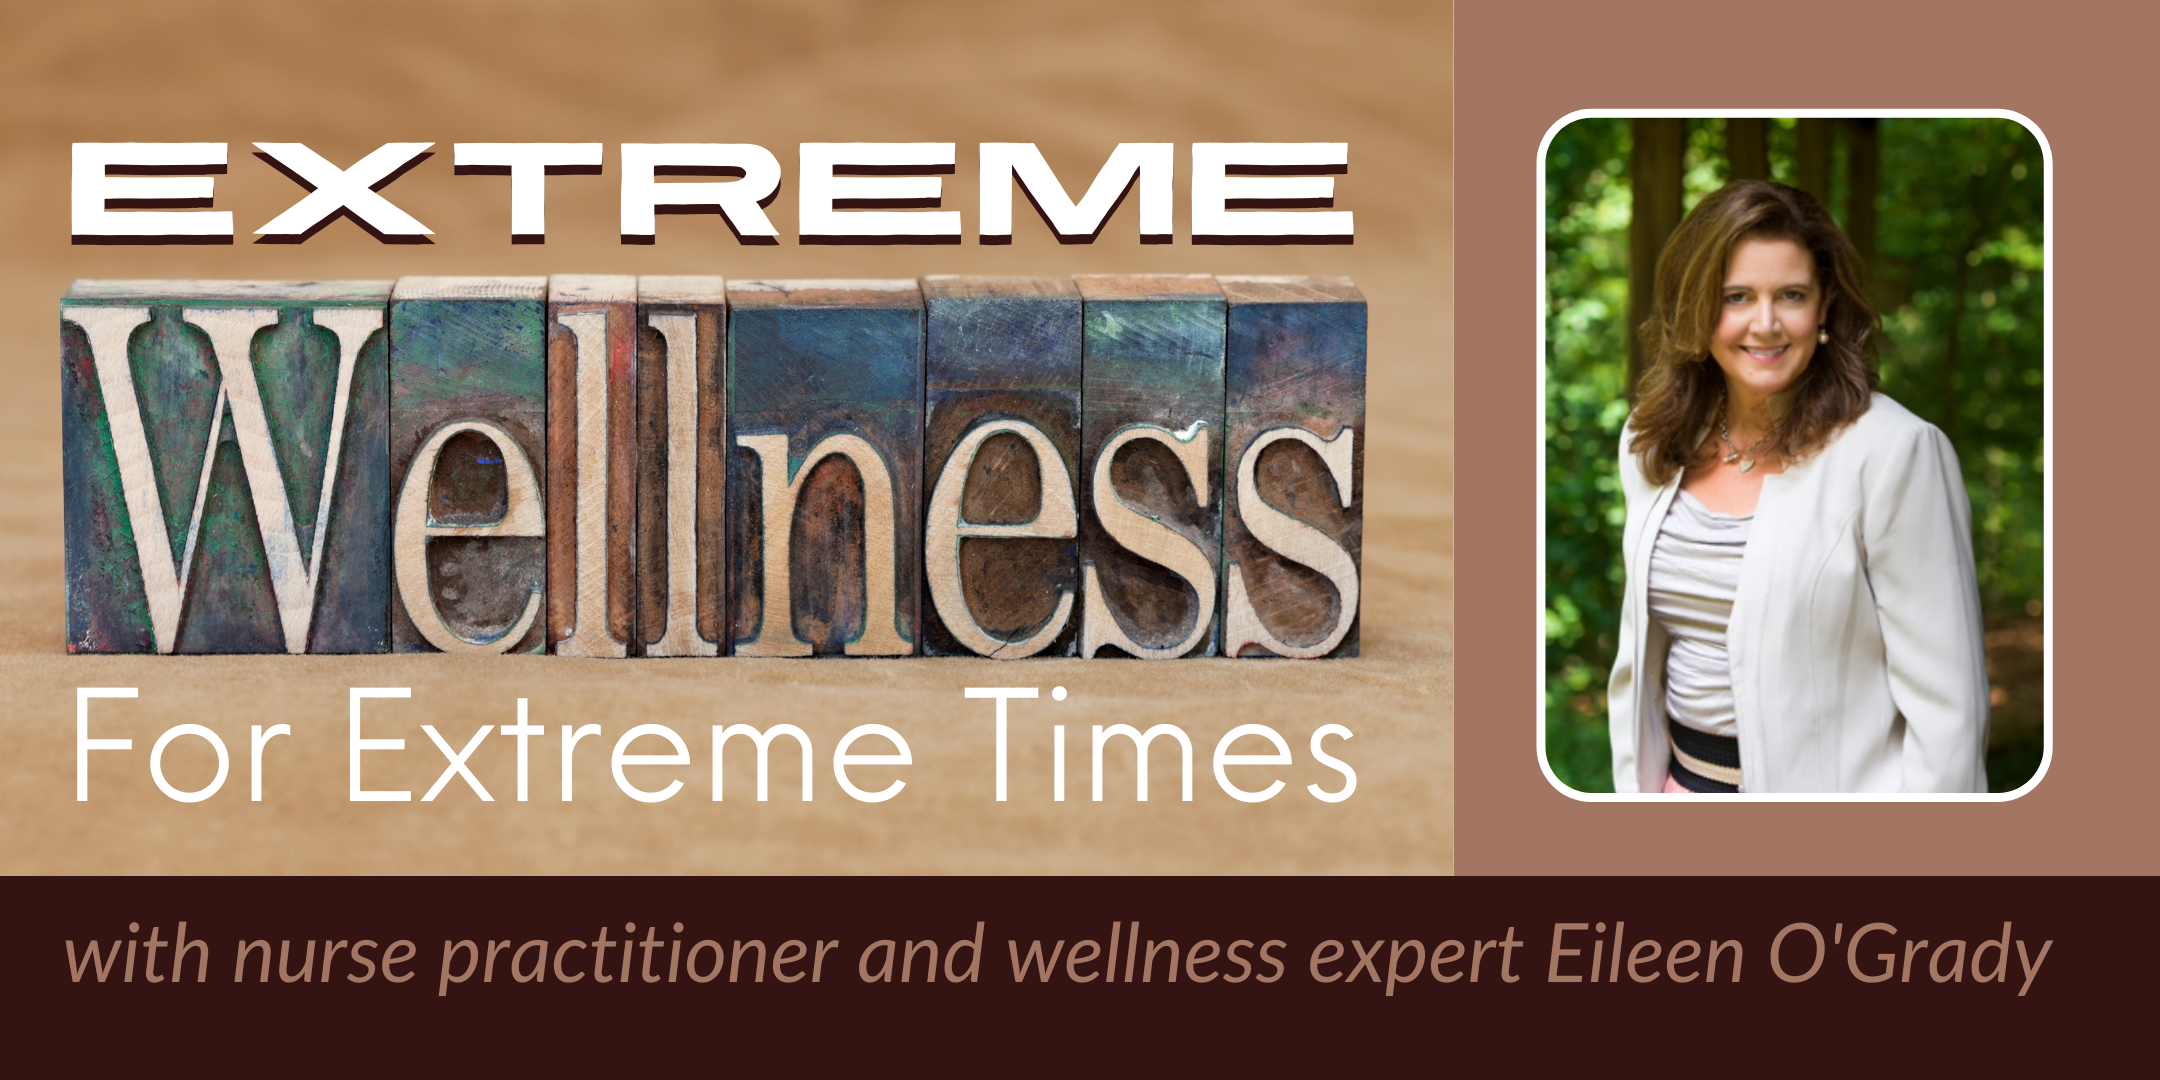 Extreme Wellness for Extreme Times with nurse practitioner and wellness expert Eileen O'Grady